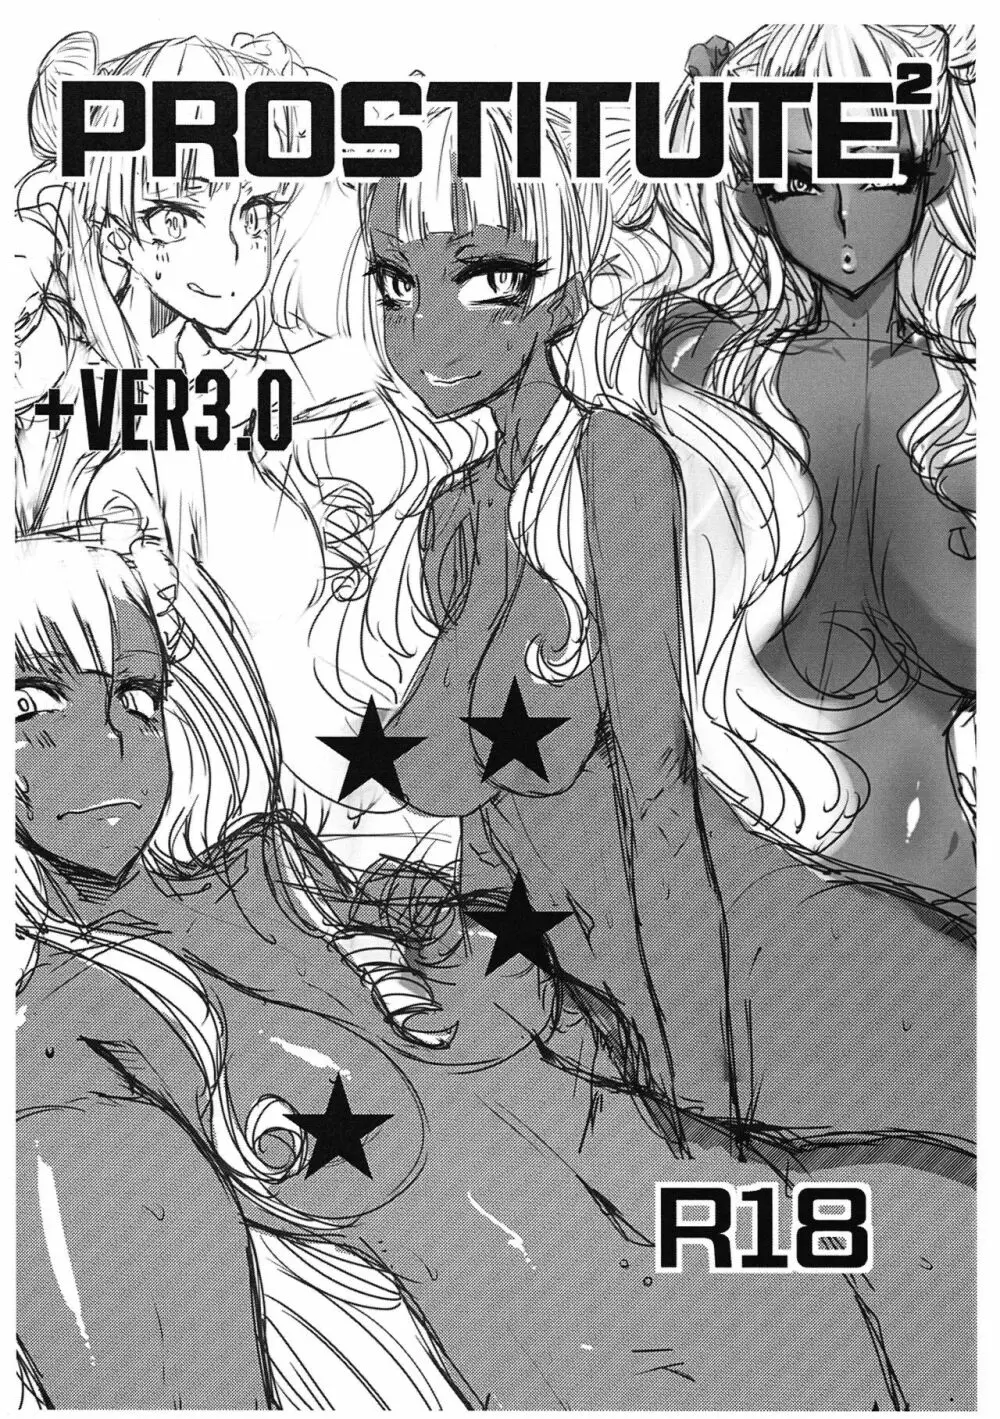 PROSTITUTE² +VER3.0 Page.1